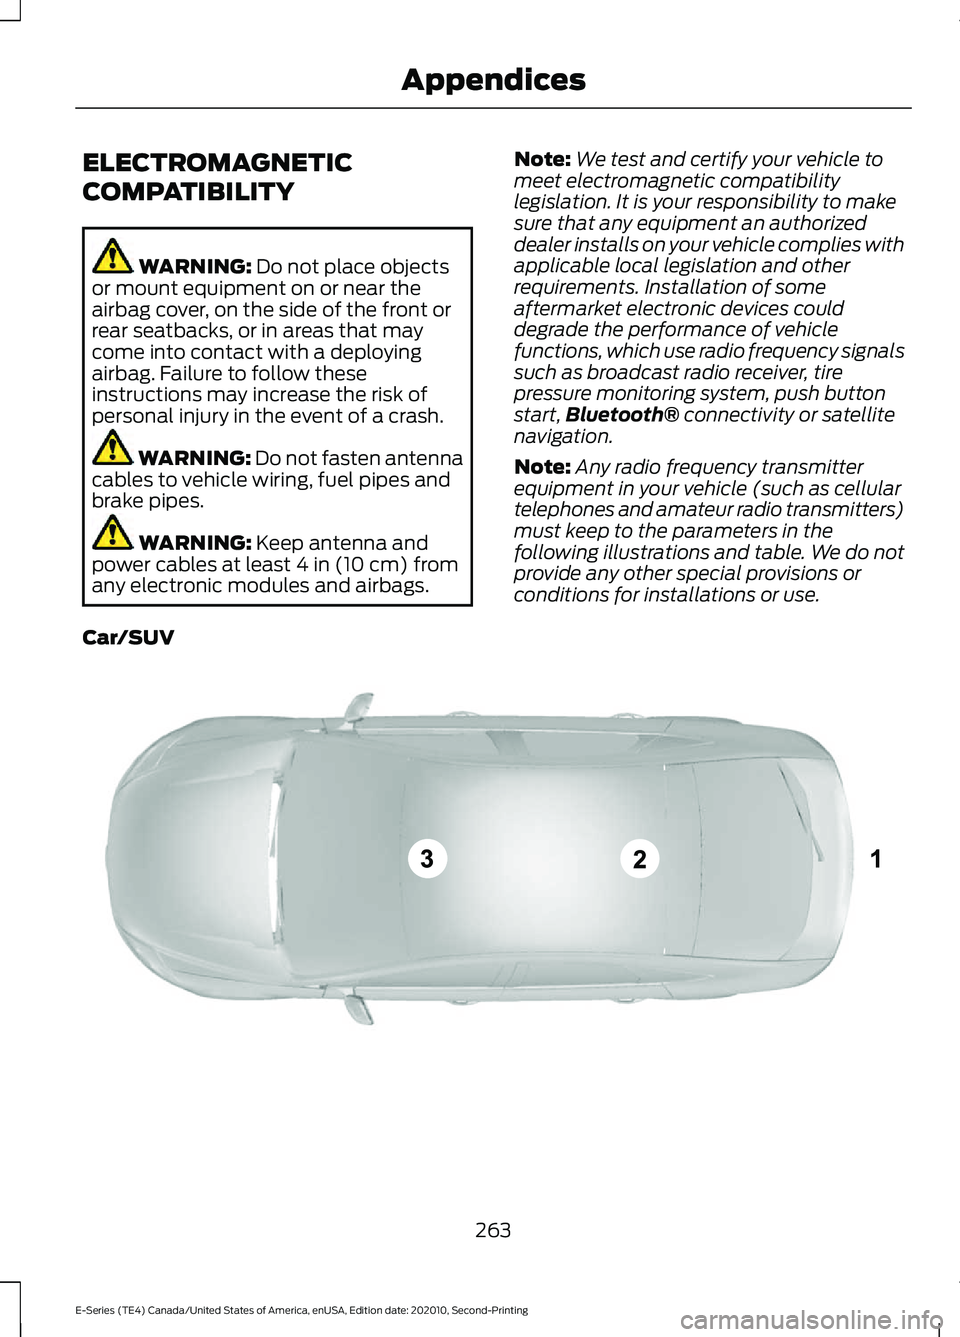 FORD E-450 2022  Owners Manual ELECTROMAGNETIC
COMPATIBILITY
WARNING: Do not place objects
or mount equipment on or near the
airbag cover, on the side of the front or
rear seatbacks, or in areas that may
come into contact with a de